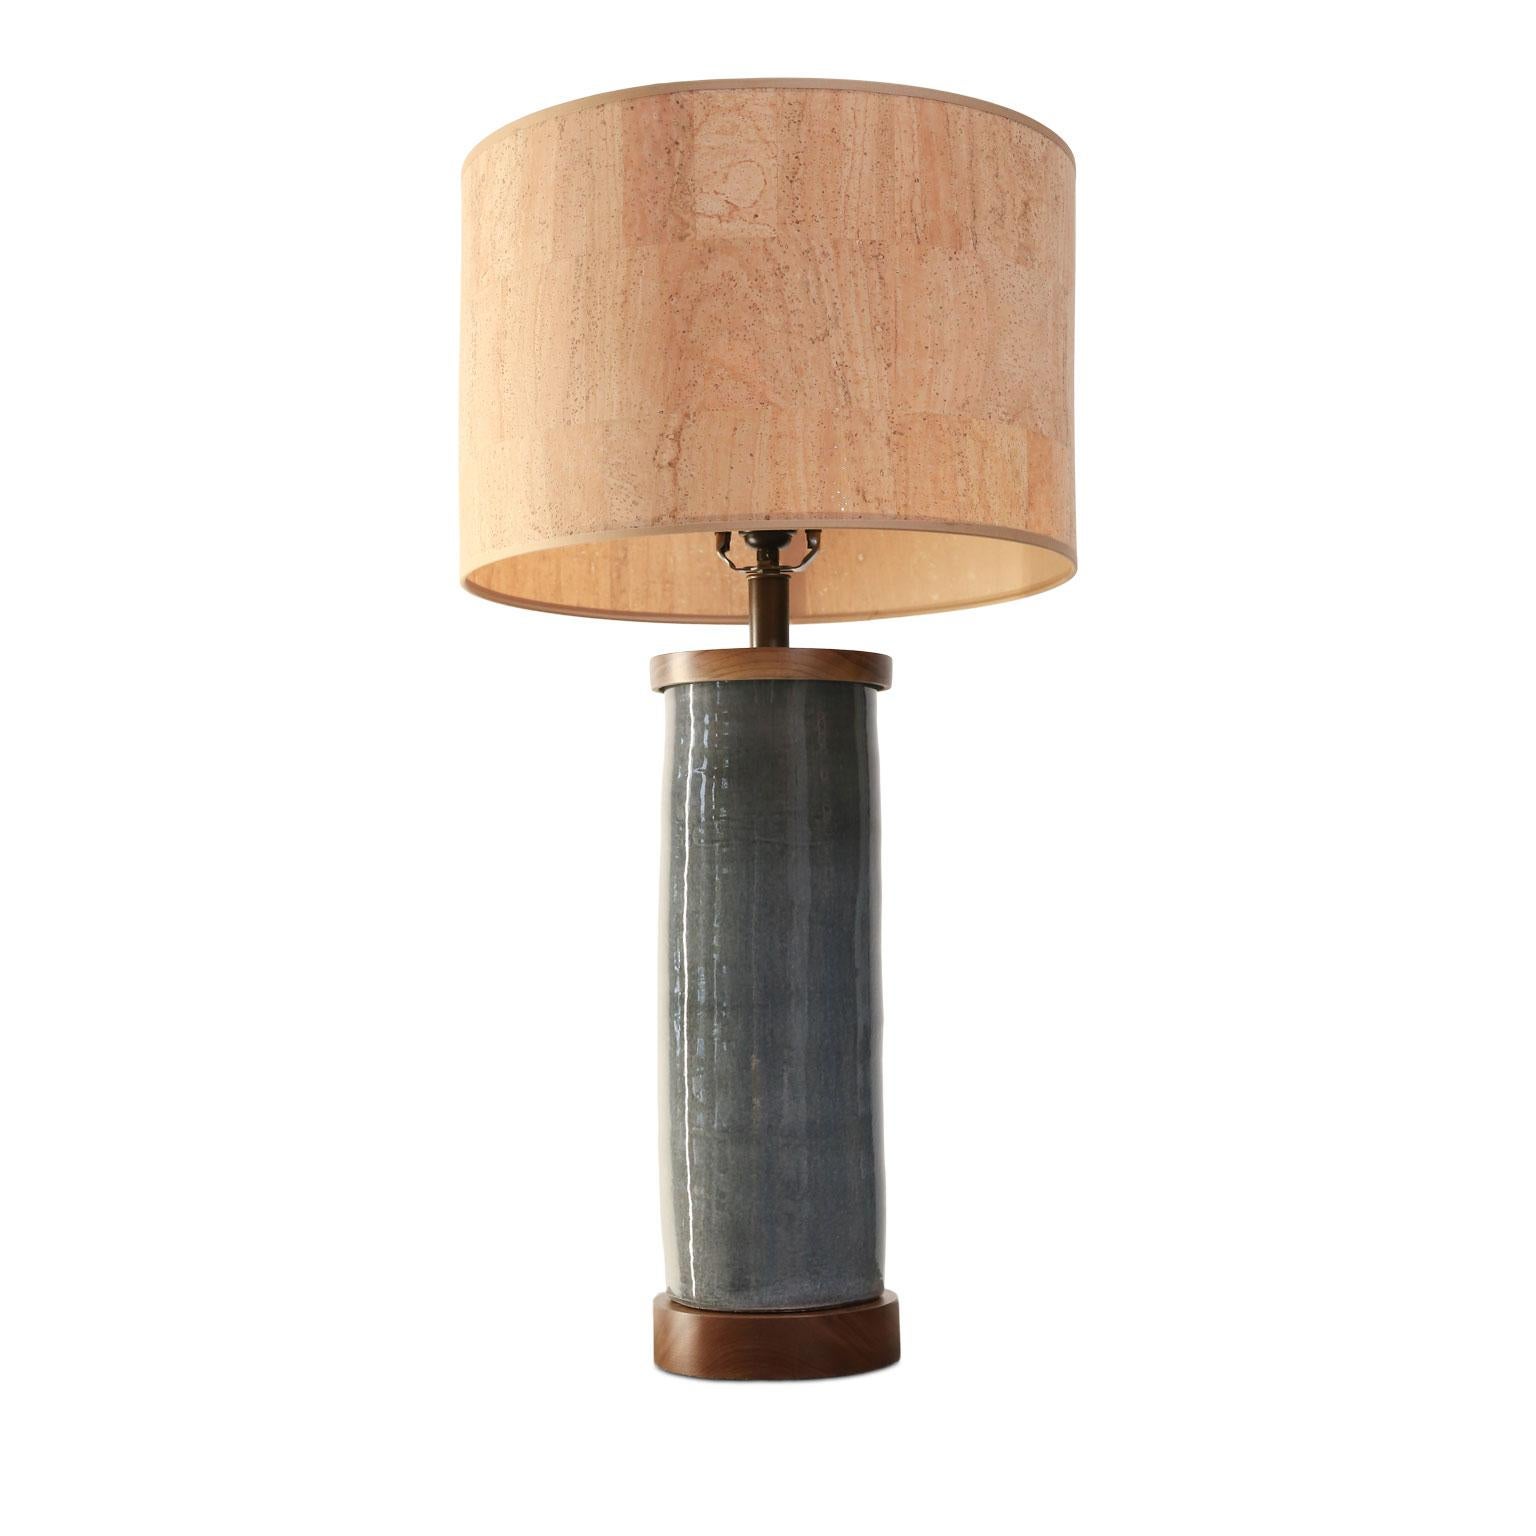 Two dark gray cylinder-shape table lamps, custom made from hand-thrown ceramic cylinders finished with walnut bases and tops. Newly wired for use within the USA using all UL listed parts. Includes complementary drum-shape cork shades. Table lamps